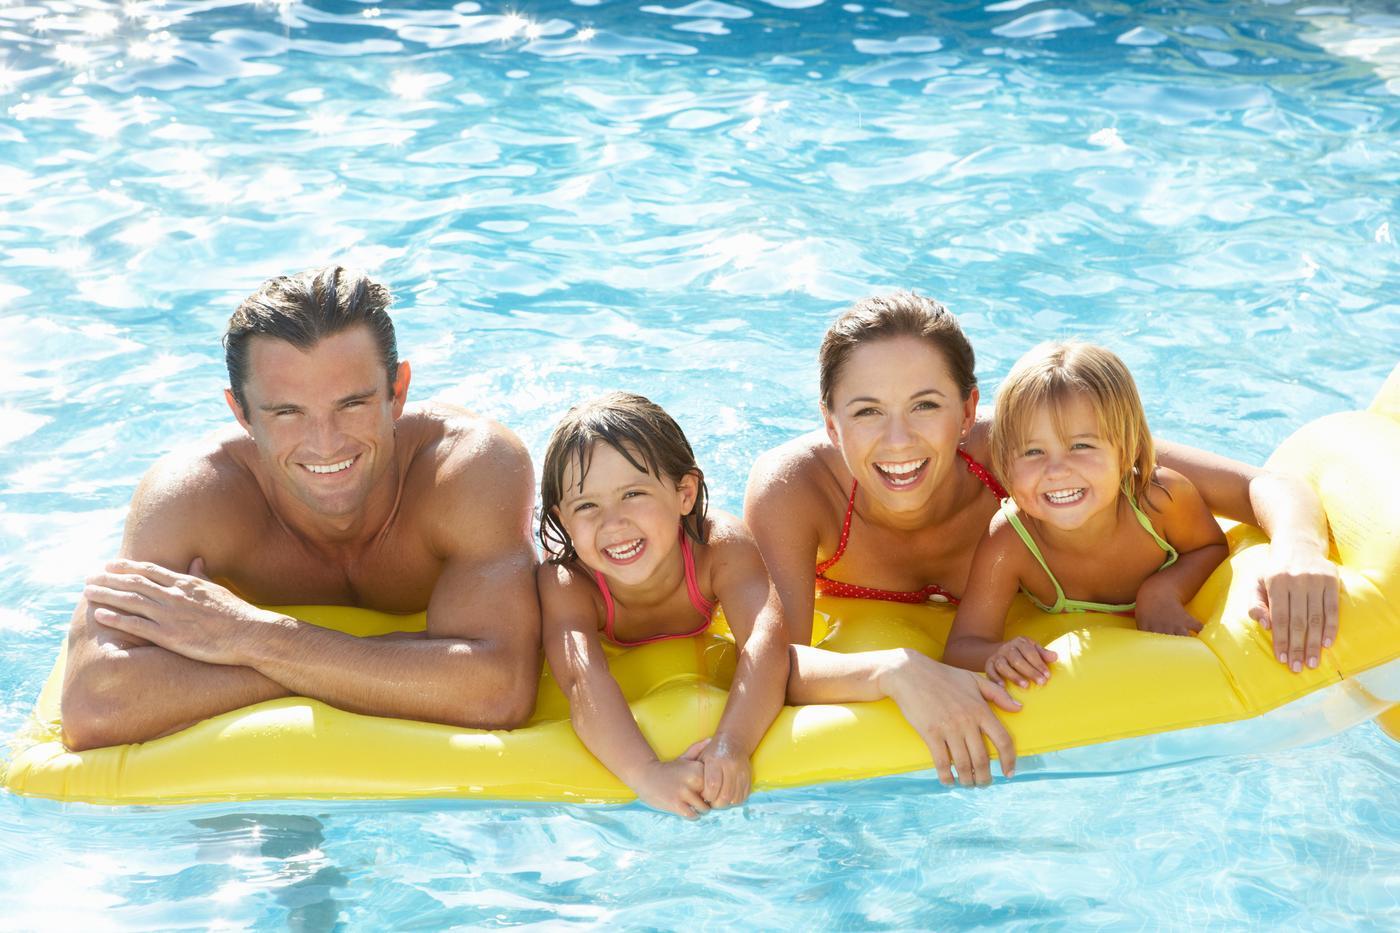 Pool Safety Tips for Families